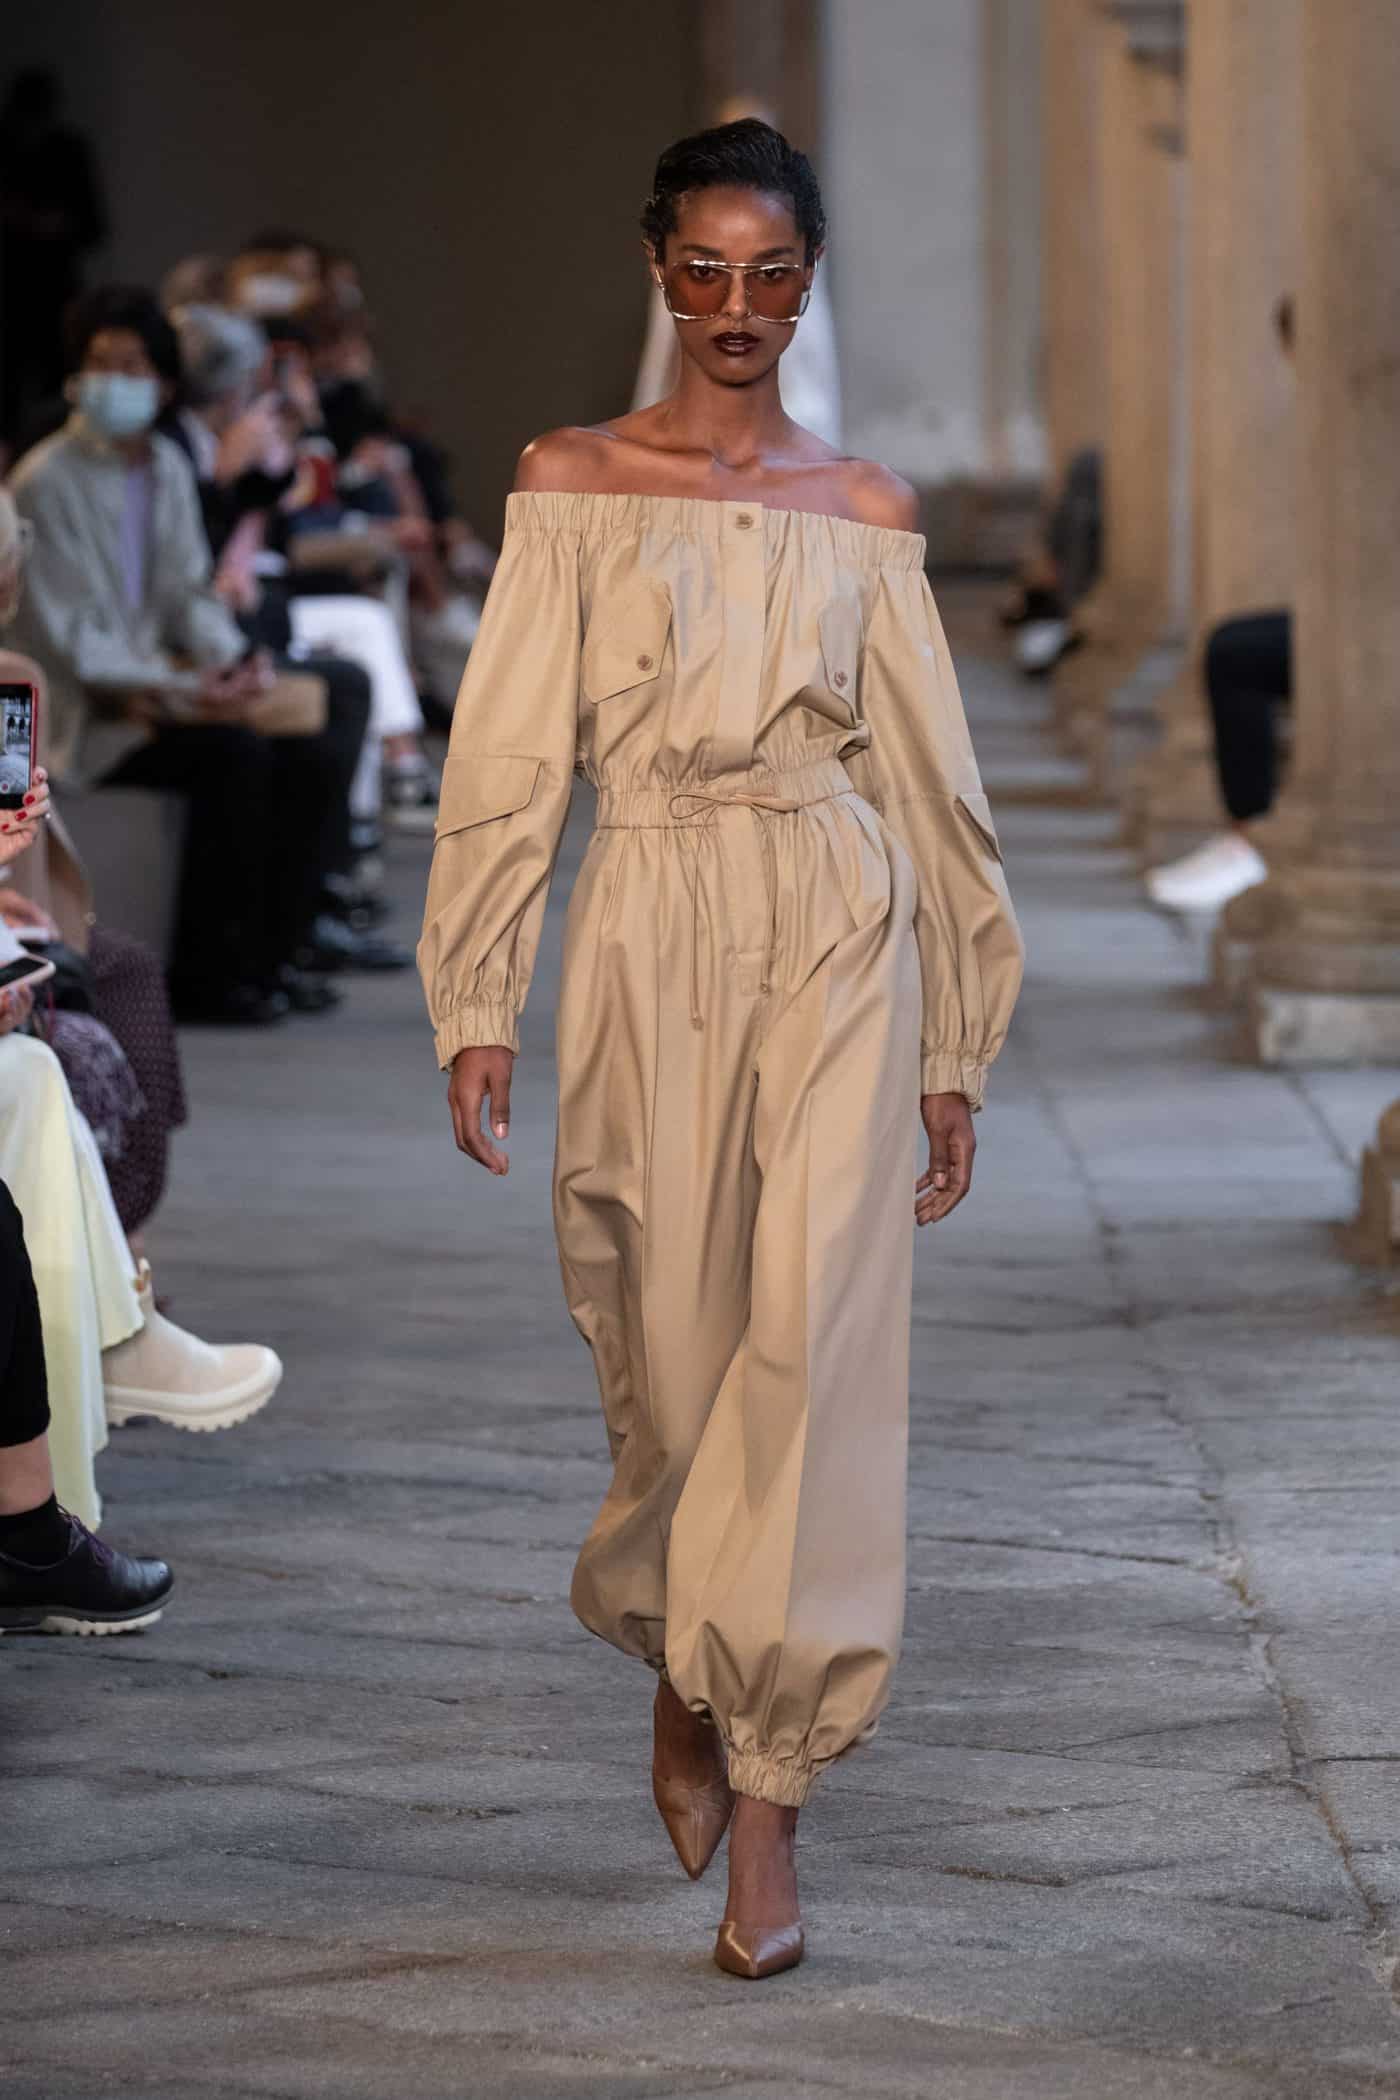 Max Mara Presents A Uniform For Women Ready To Rebuild The World - Daily  Front Row